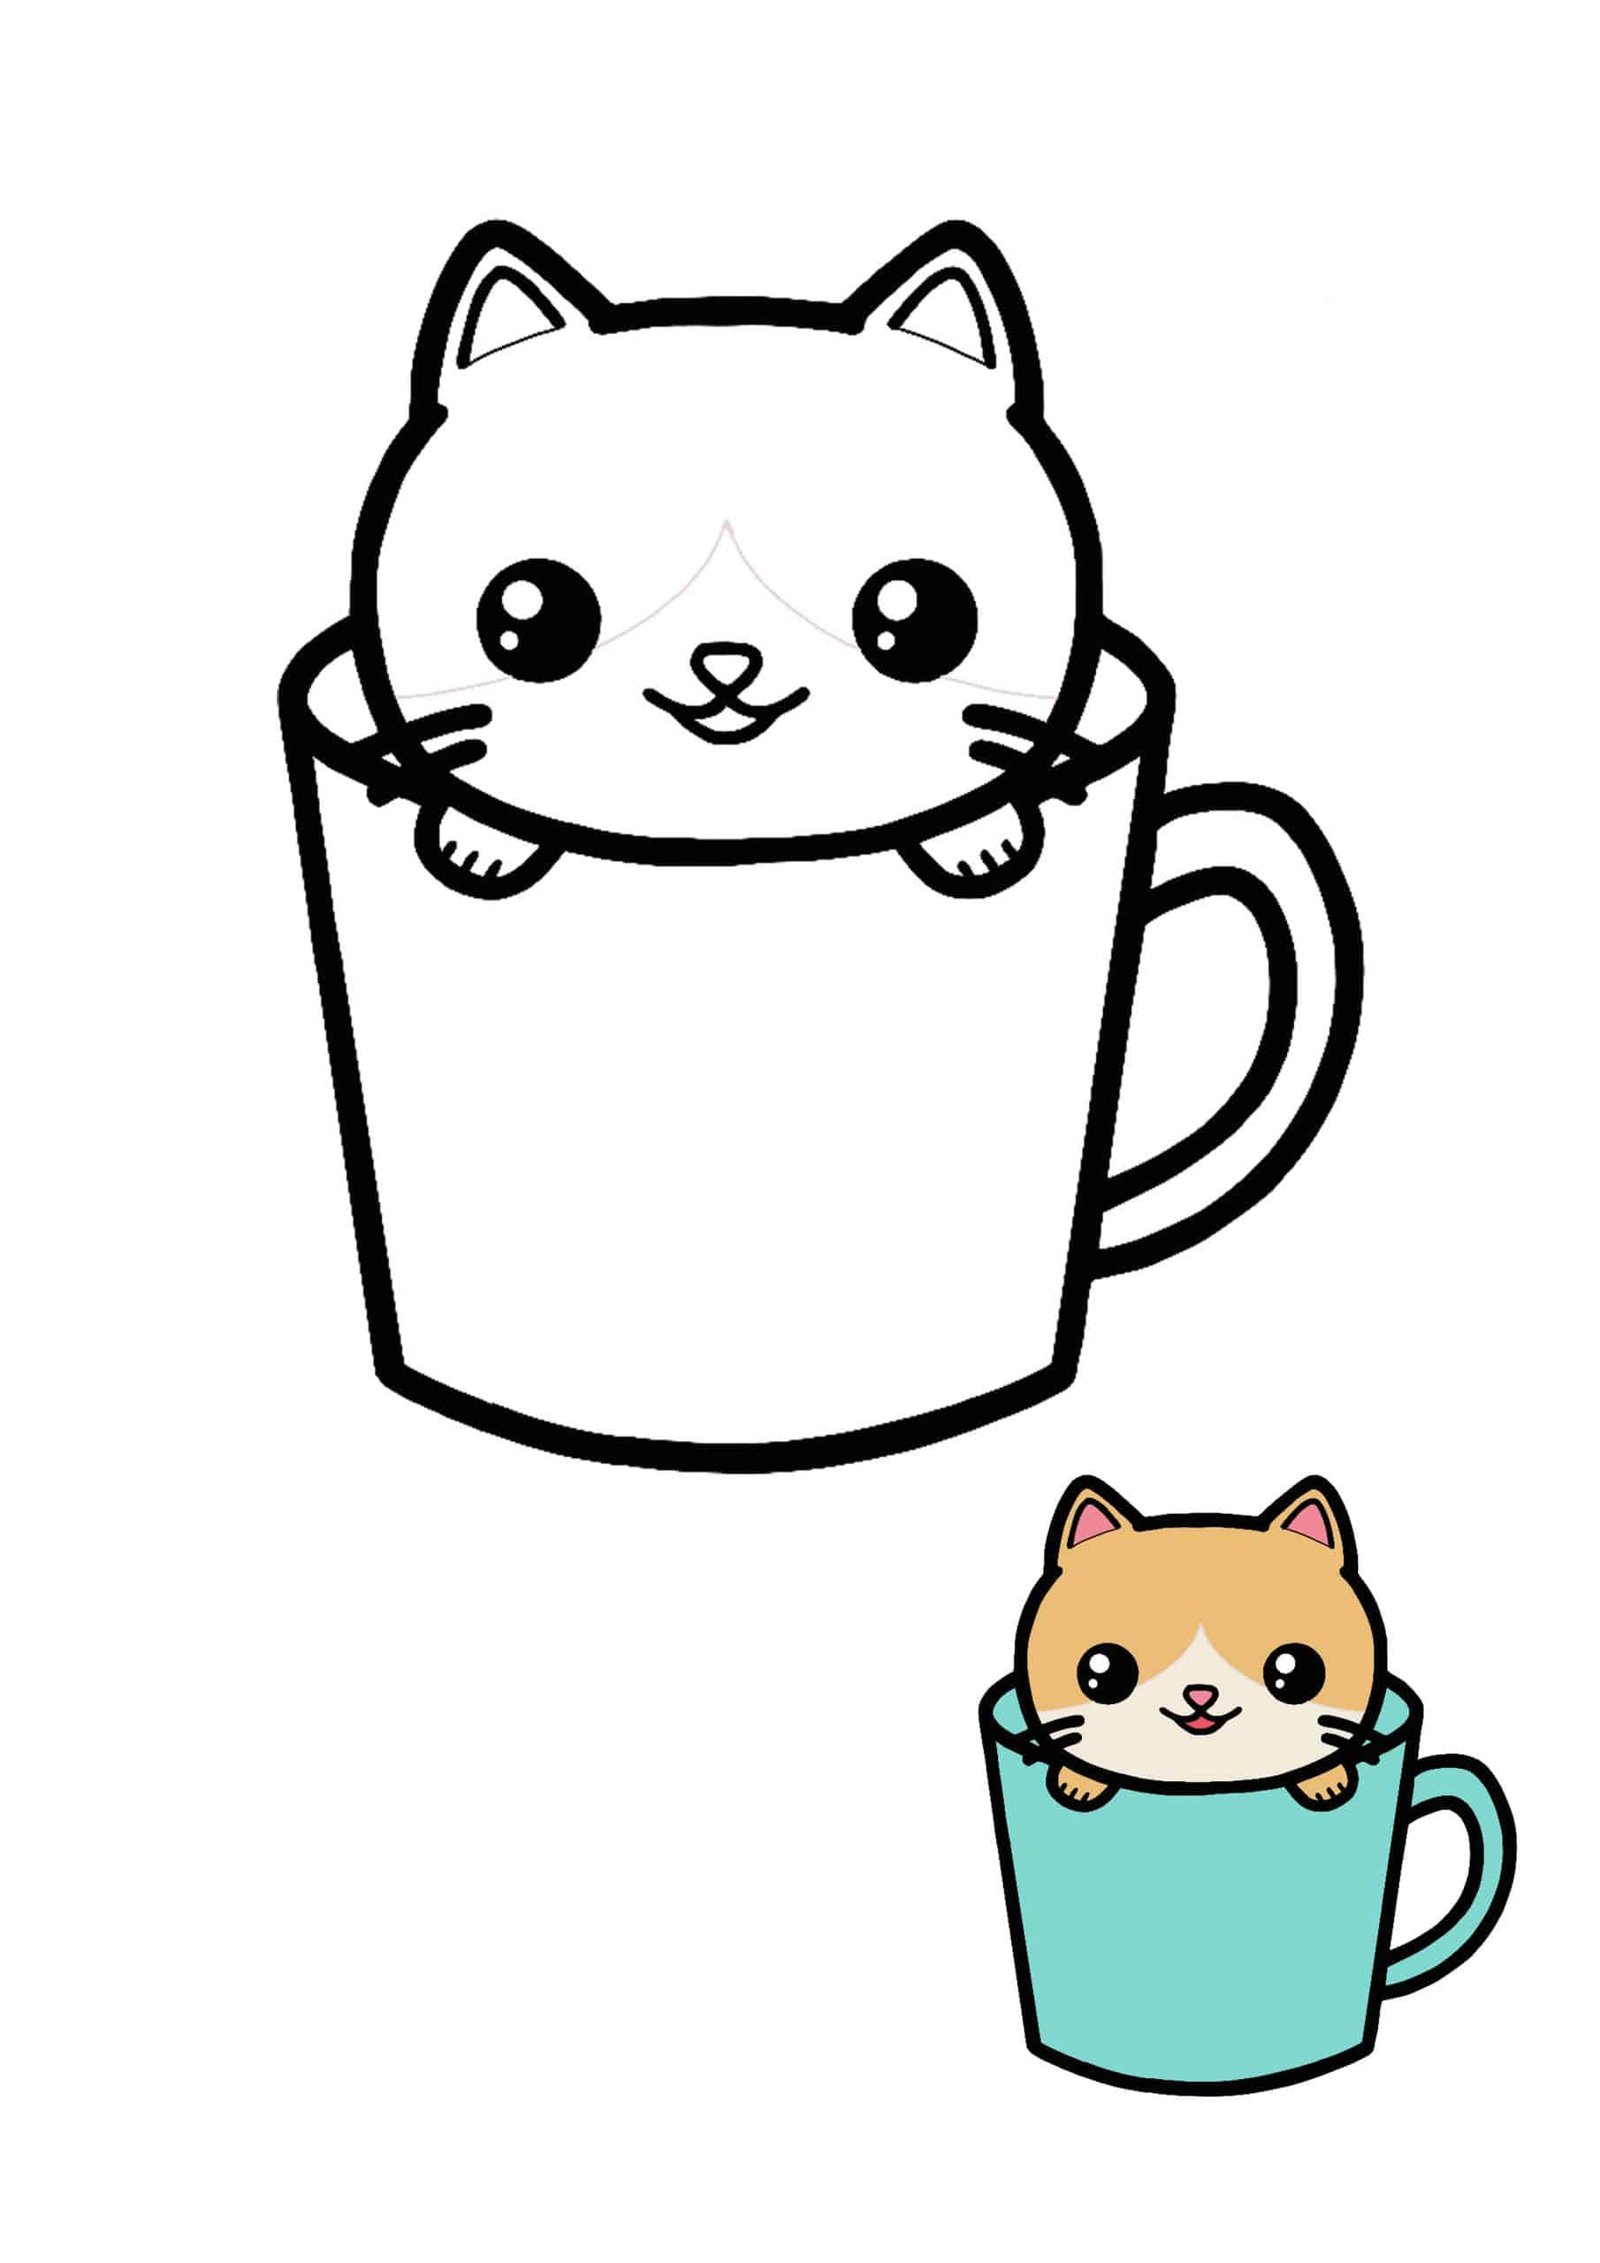 Kawaii Cat Teacup coloring page for kids